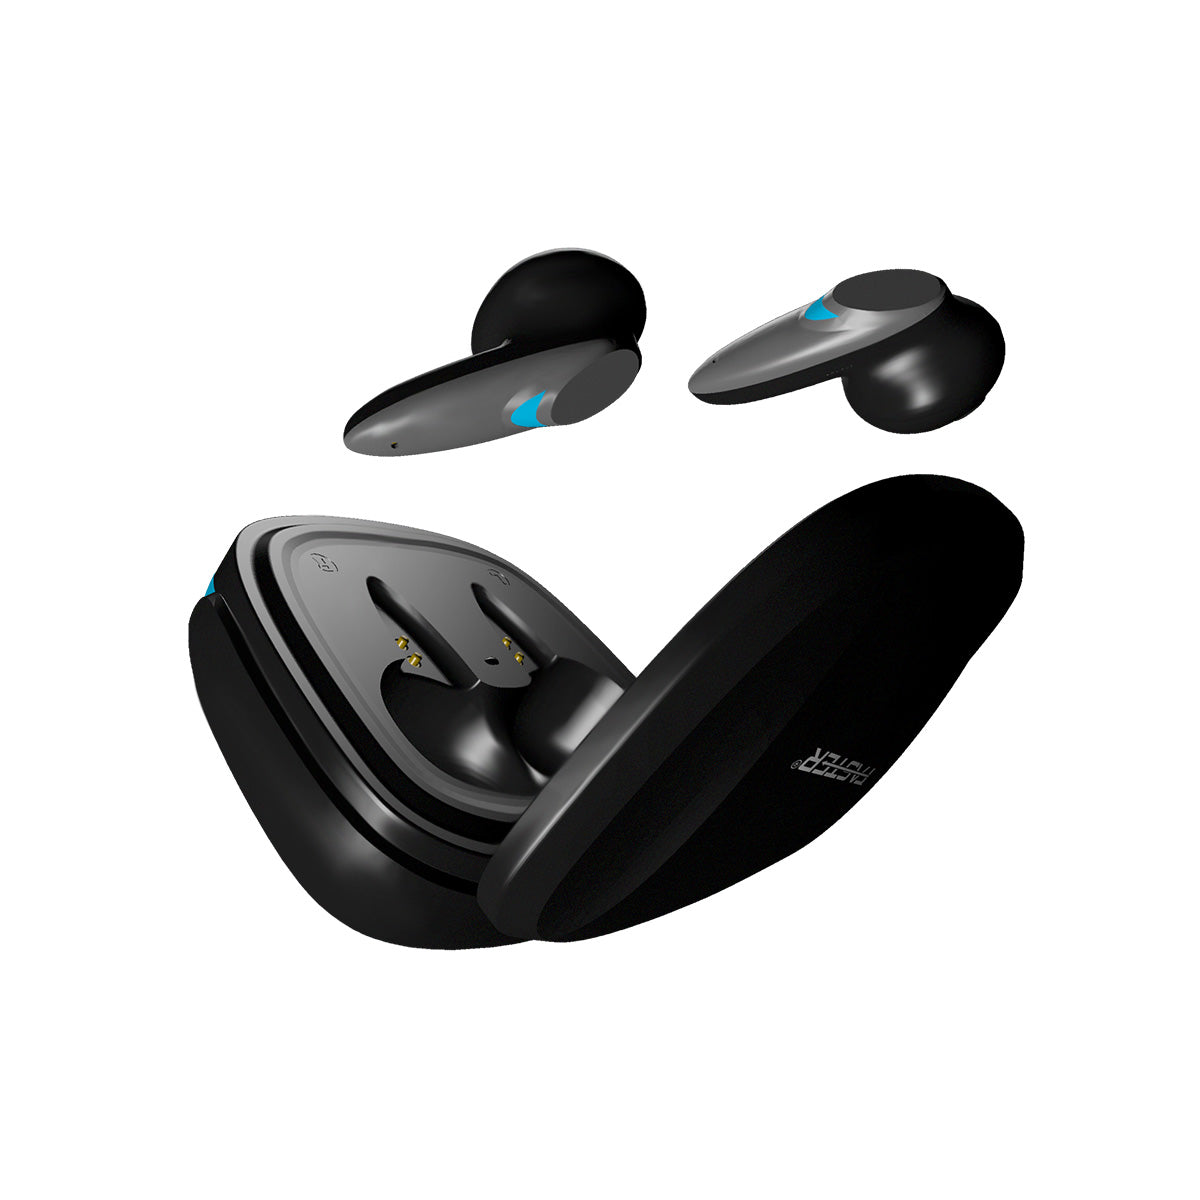 Faster Gaming True Wireless Earbuds Price in Pakistan